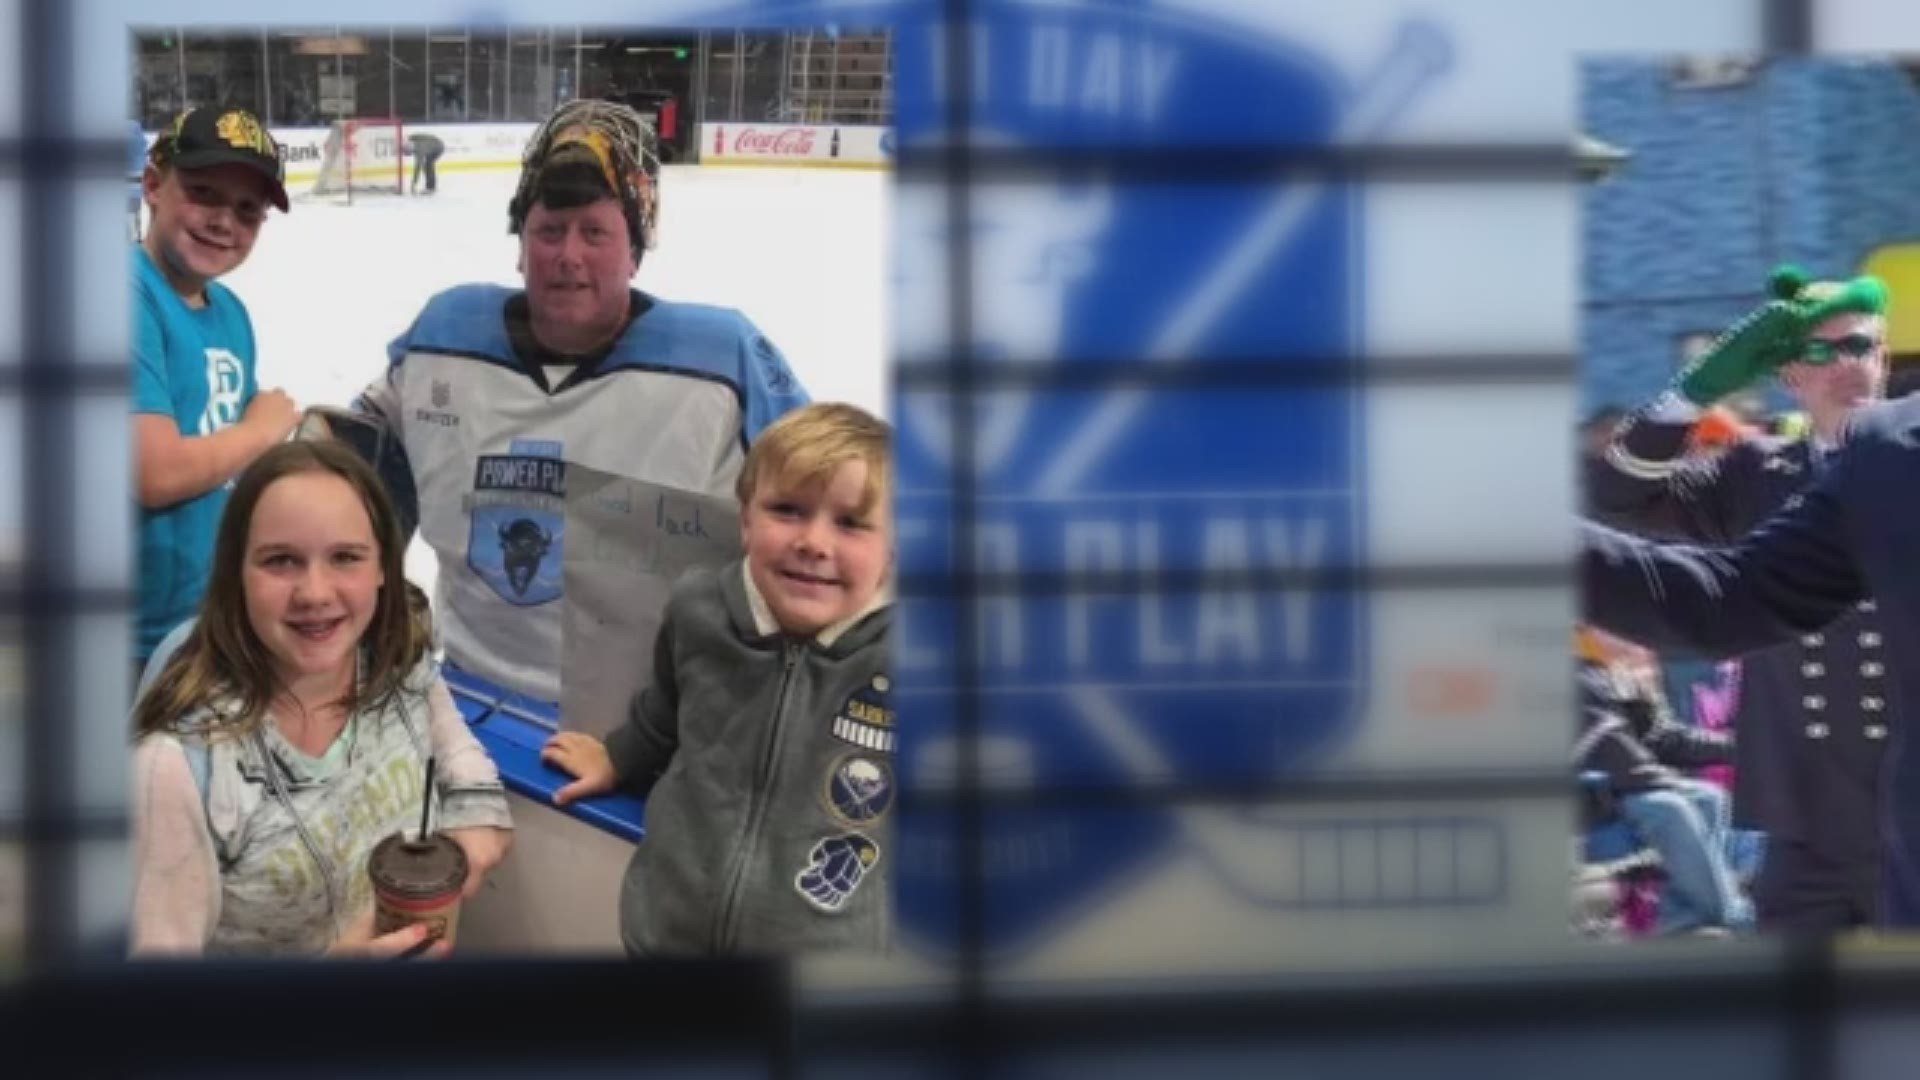 South Buffalo family is thankful for community support in their battle with cancer